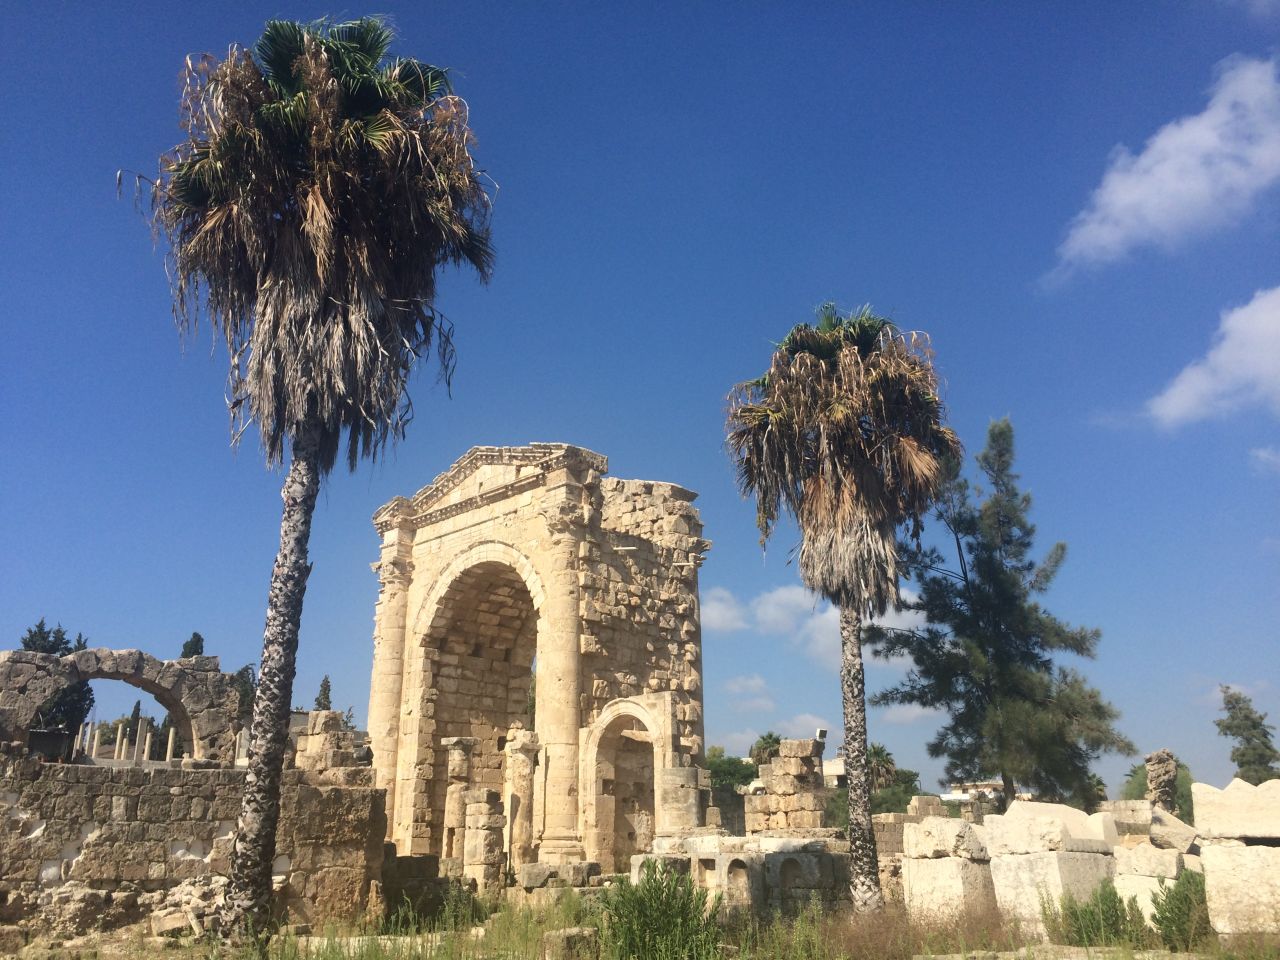 The Triumphal Arch and palm trees at the Al Bass historical site in Tyre, Lebanon.